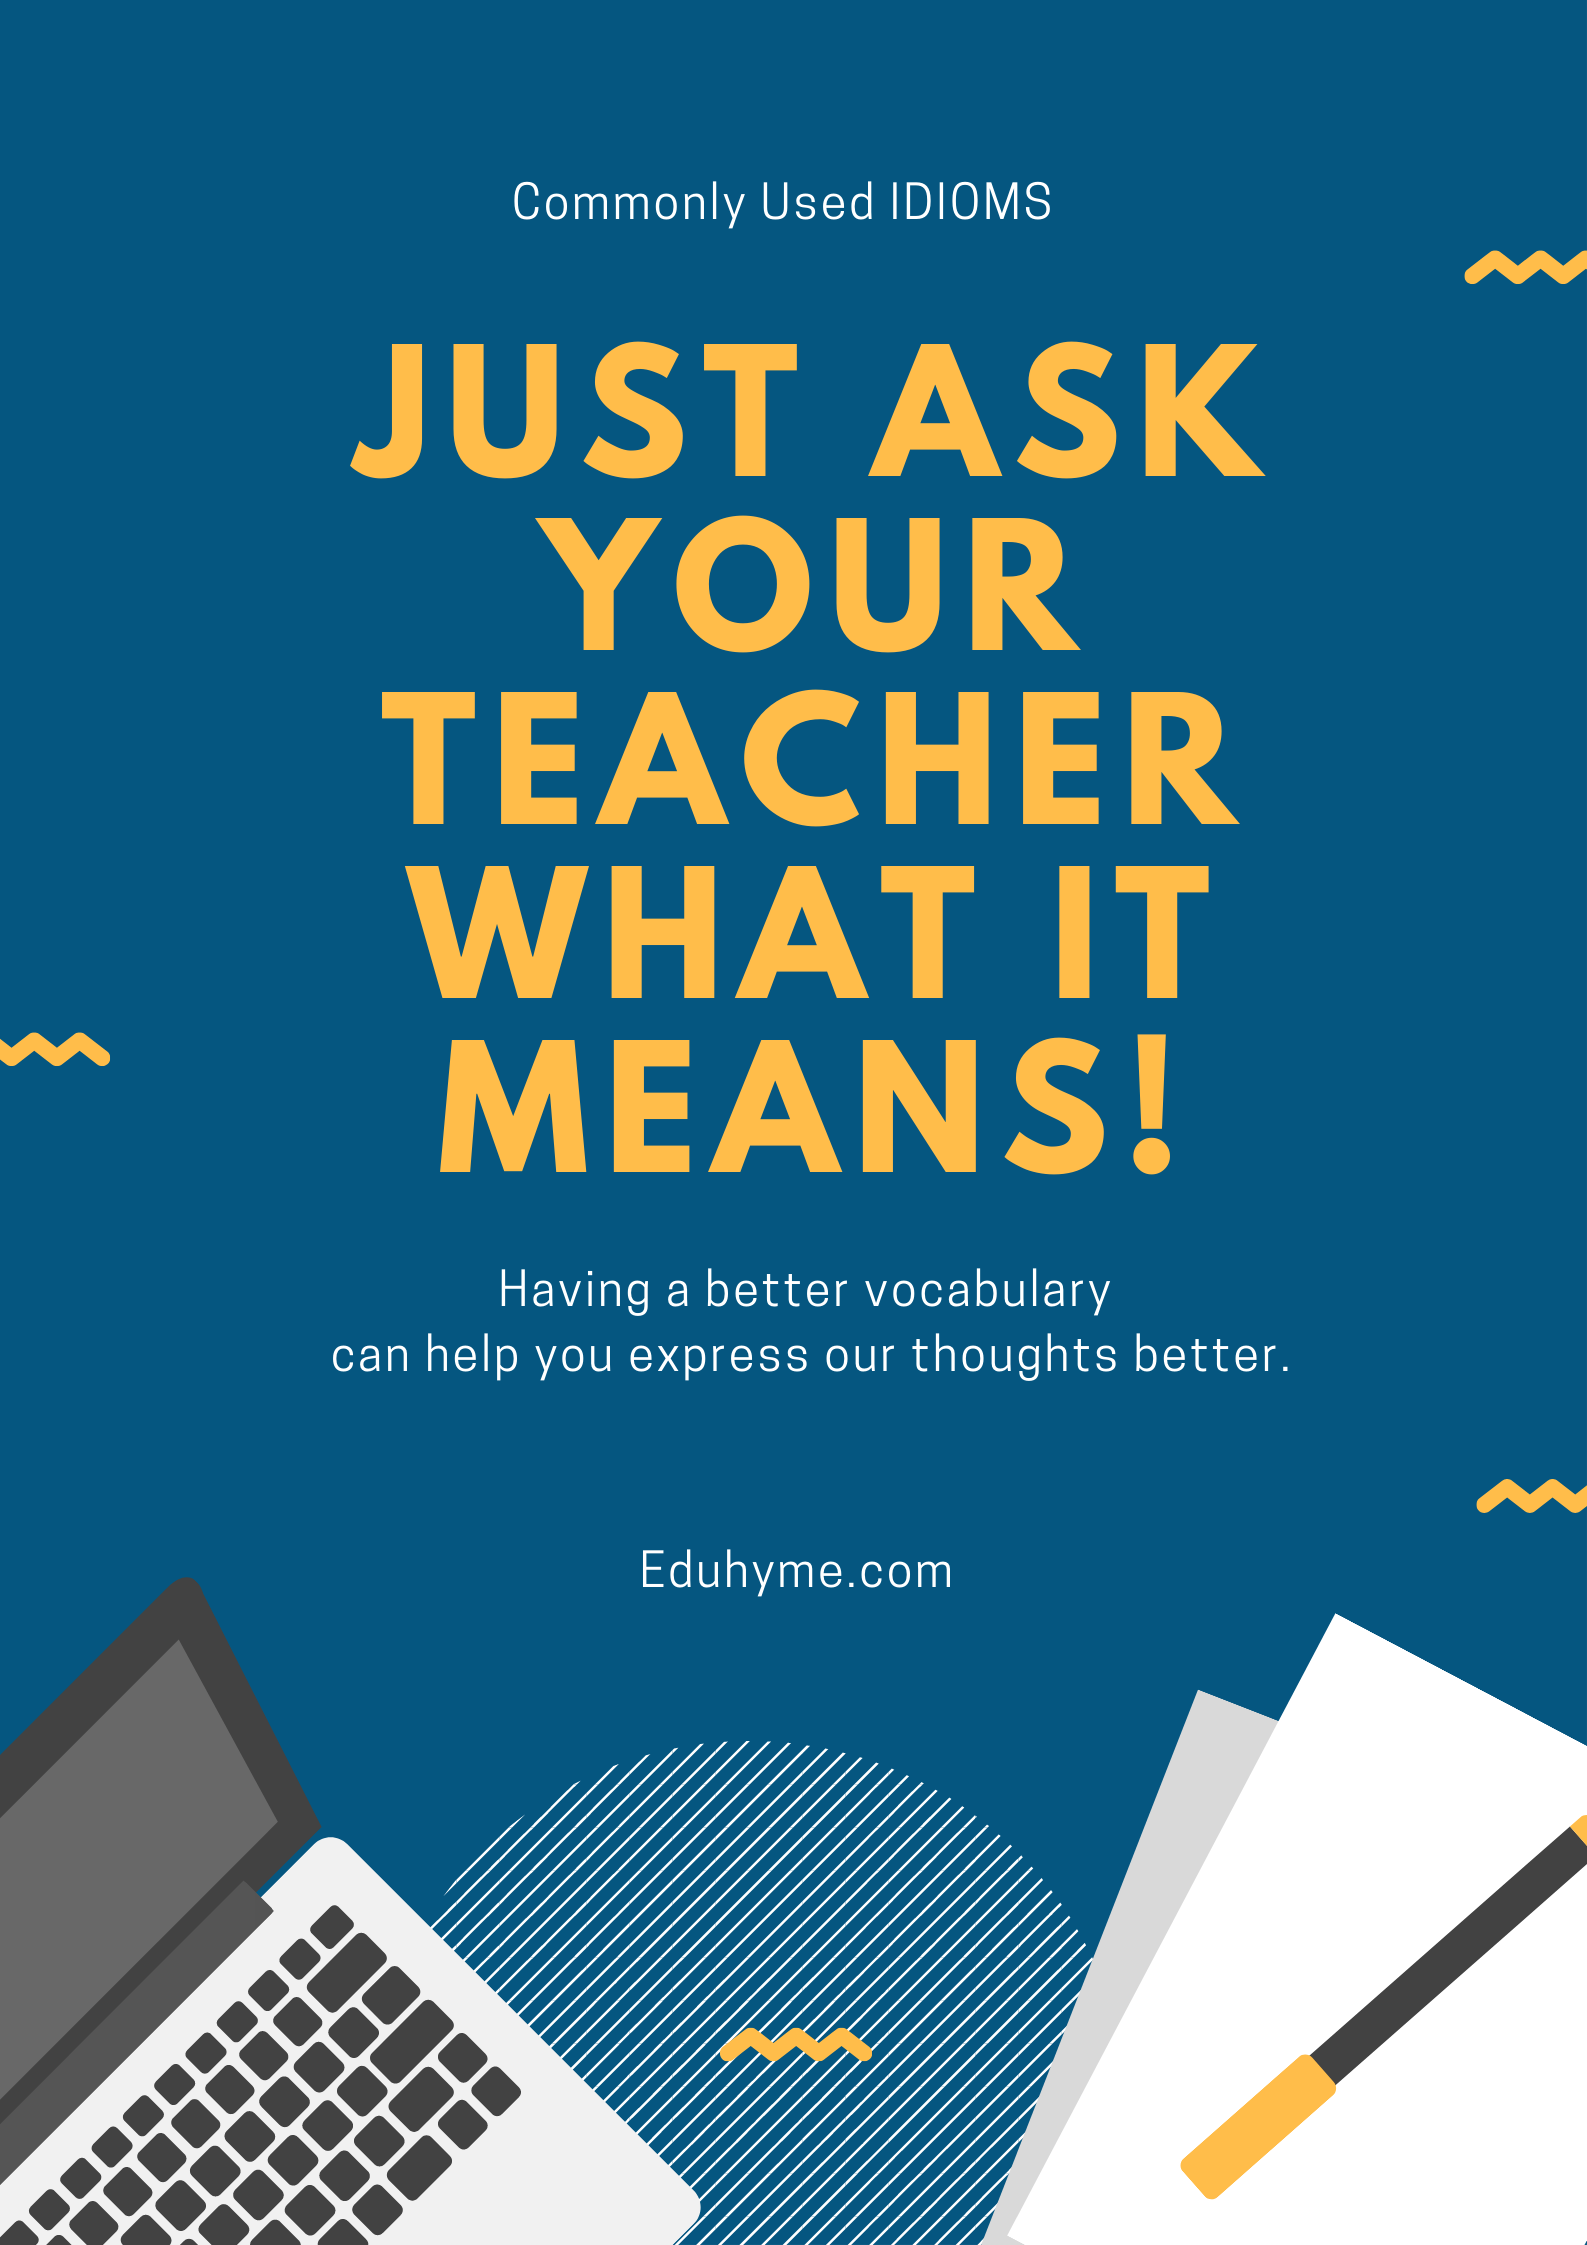 Eduhyme Commonly Used IDIOMS